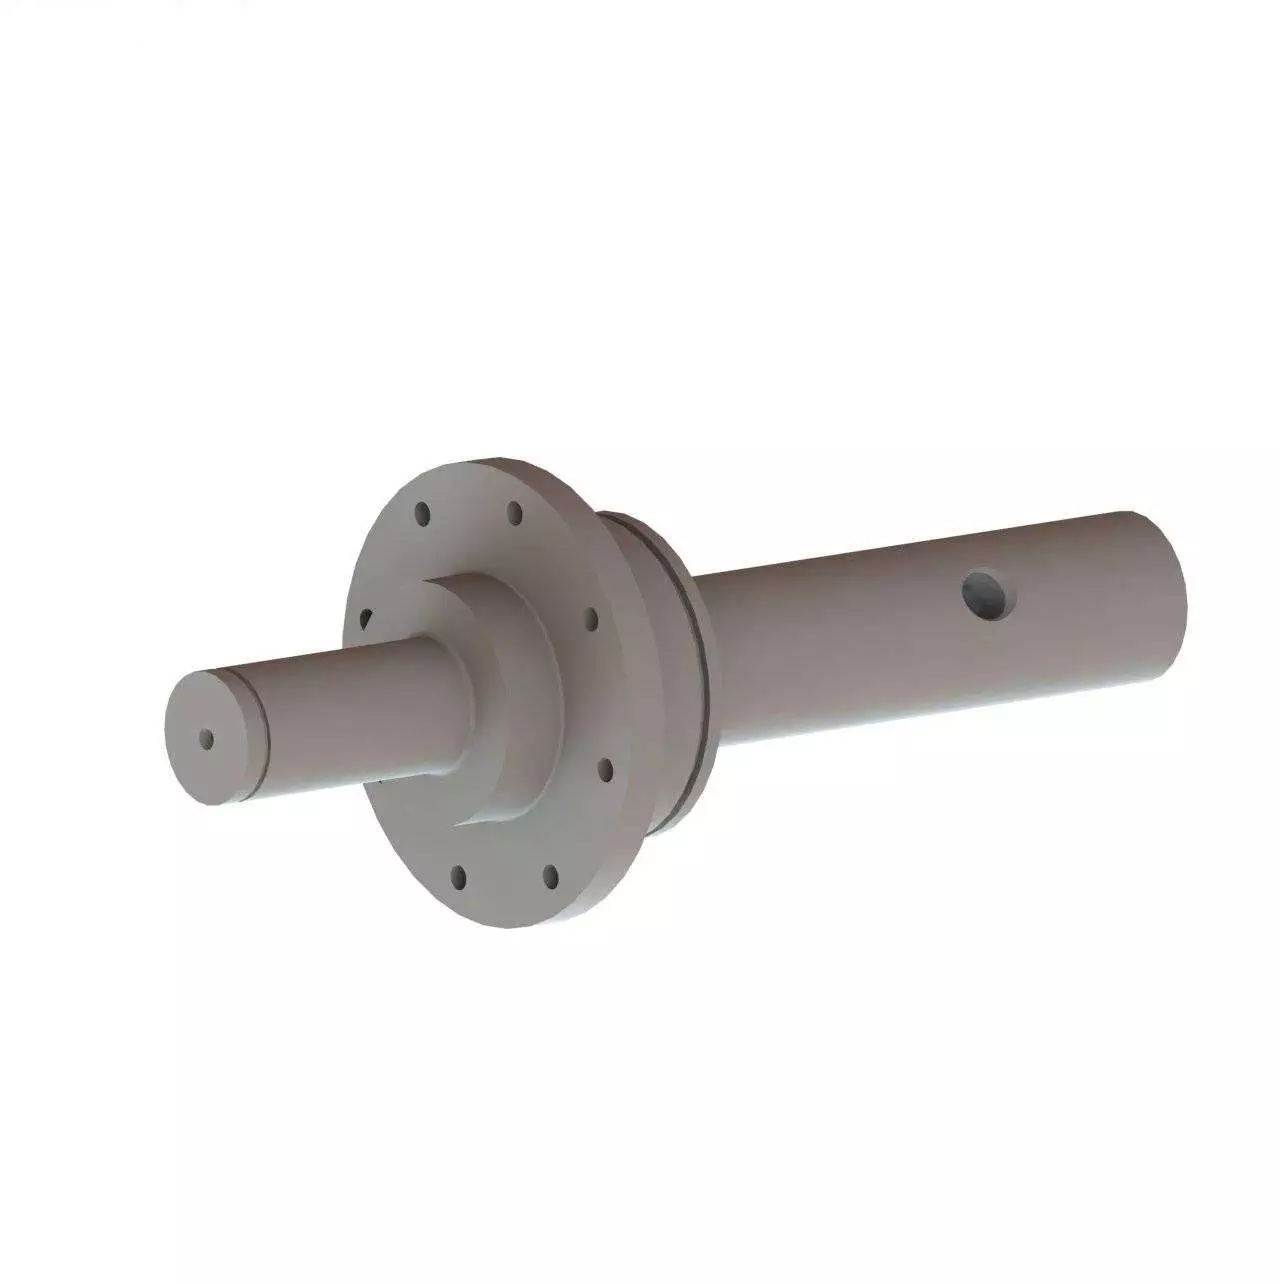 JD 5000 Series Gear Box Shaft for Electric Clutch